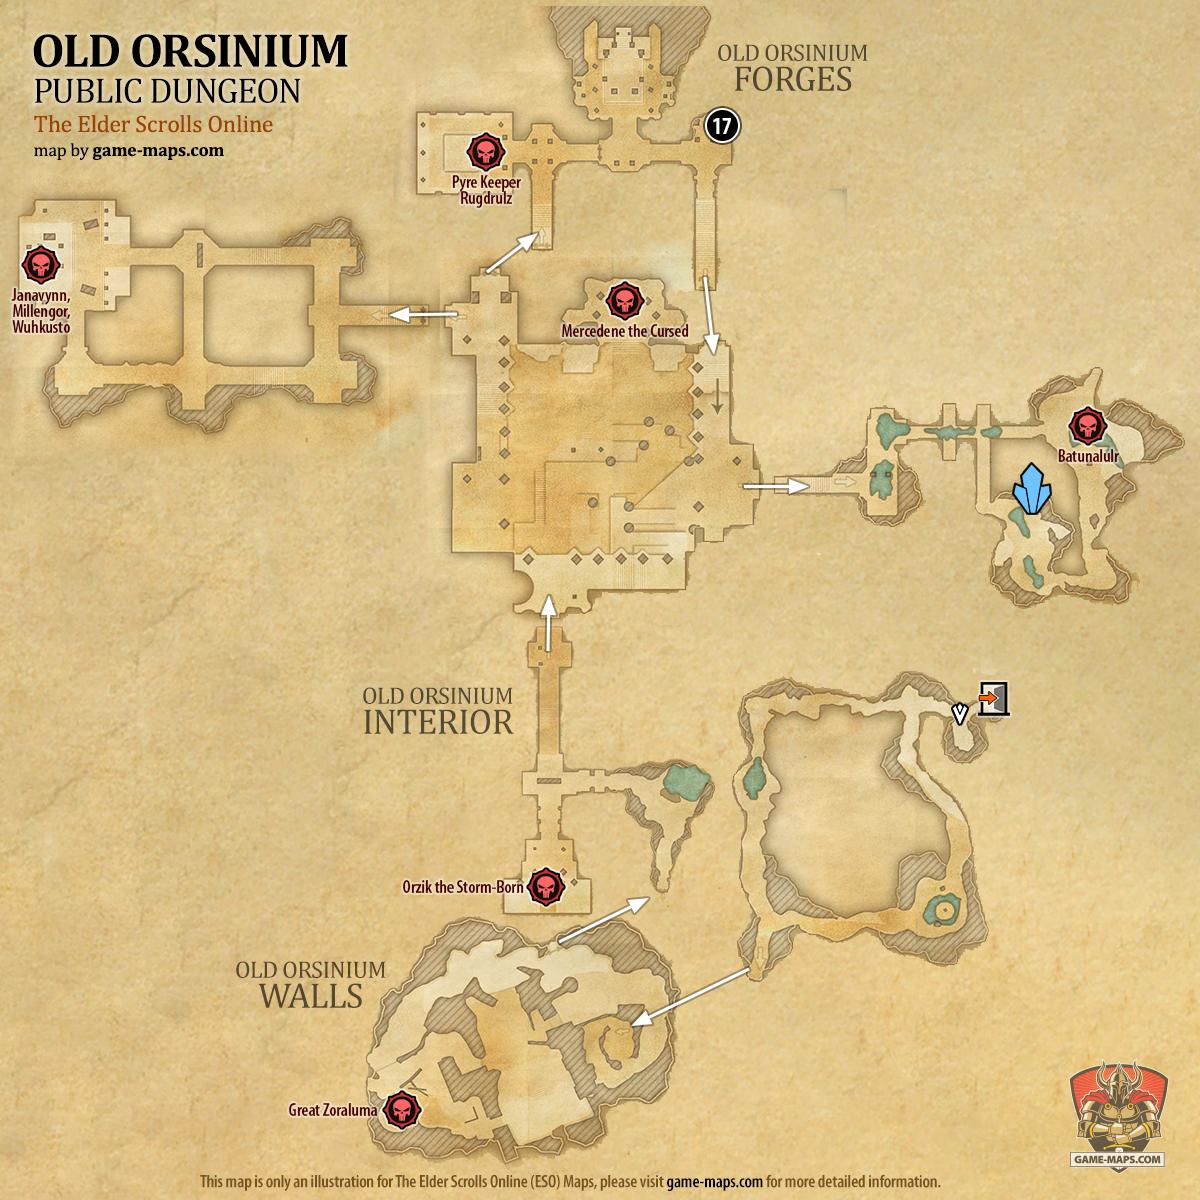 Map of Old Orsinium Public Dungeon located in Wrothgar ESO with Skyshard and Bosses.